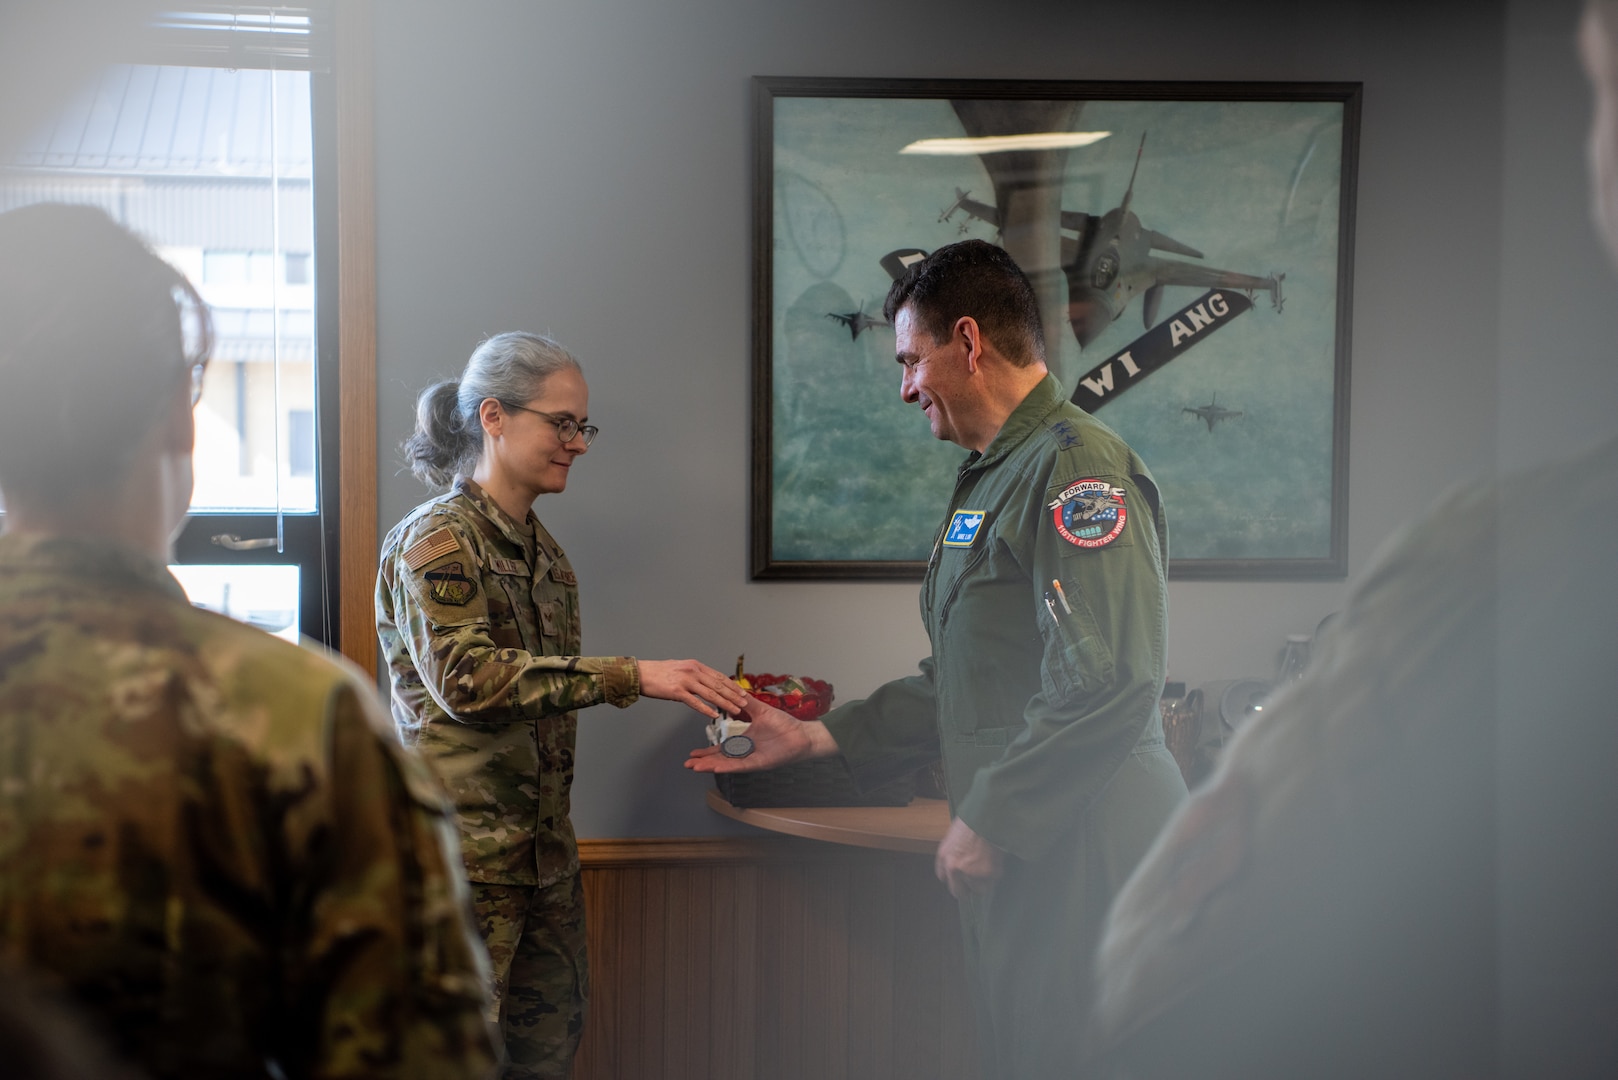 Senior Airman Margaret A. Miller receives a coin from Lt. Gen. Michael A. Loh, director, Air National Guard, at the 128th Air Refueling Wing, Milwaukee, Wisconsin, March 3, 2024. Miller is a part of the 128th ARW medical group and was recognized for exceptional personnel processing that ensured maximum Airmen readiness across the wing.